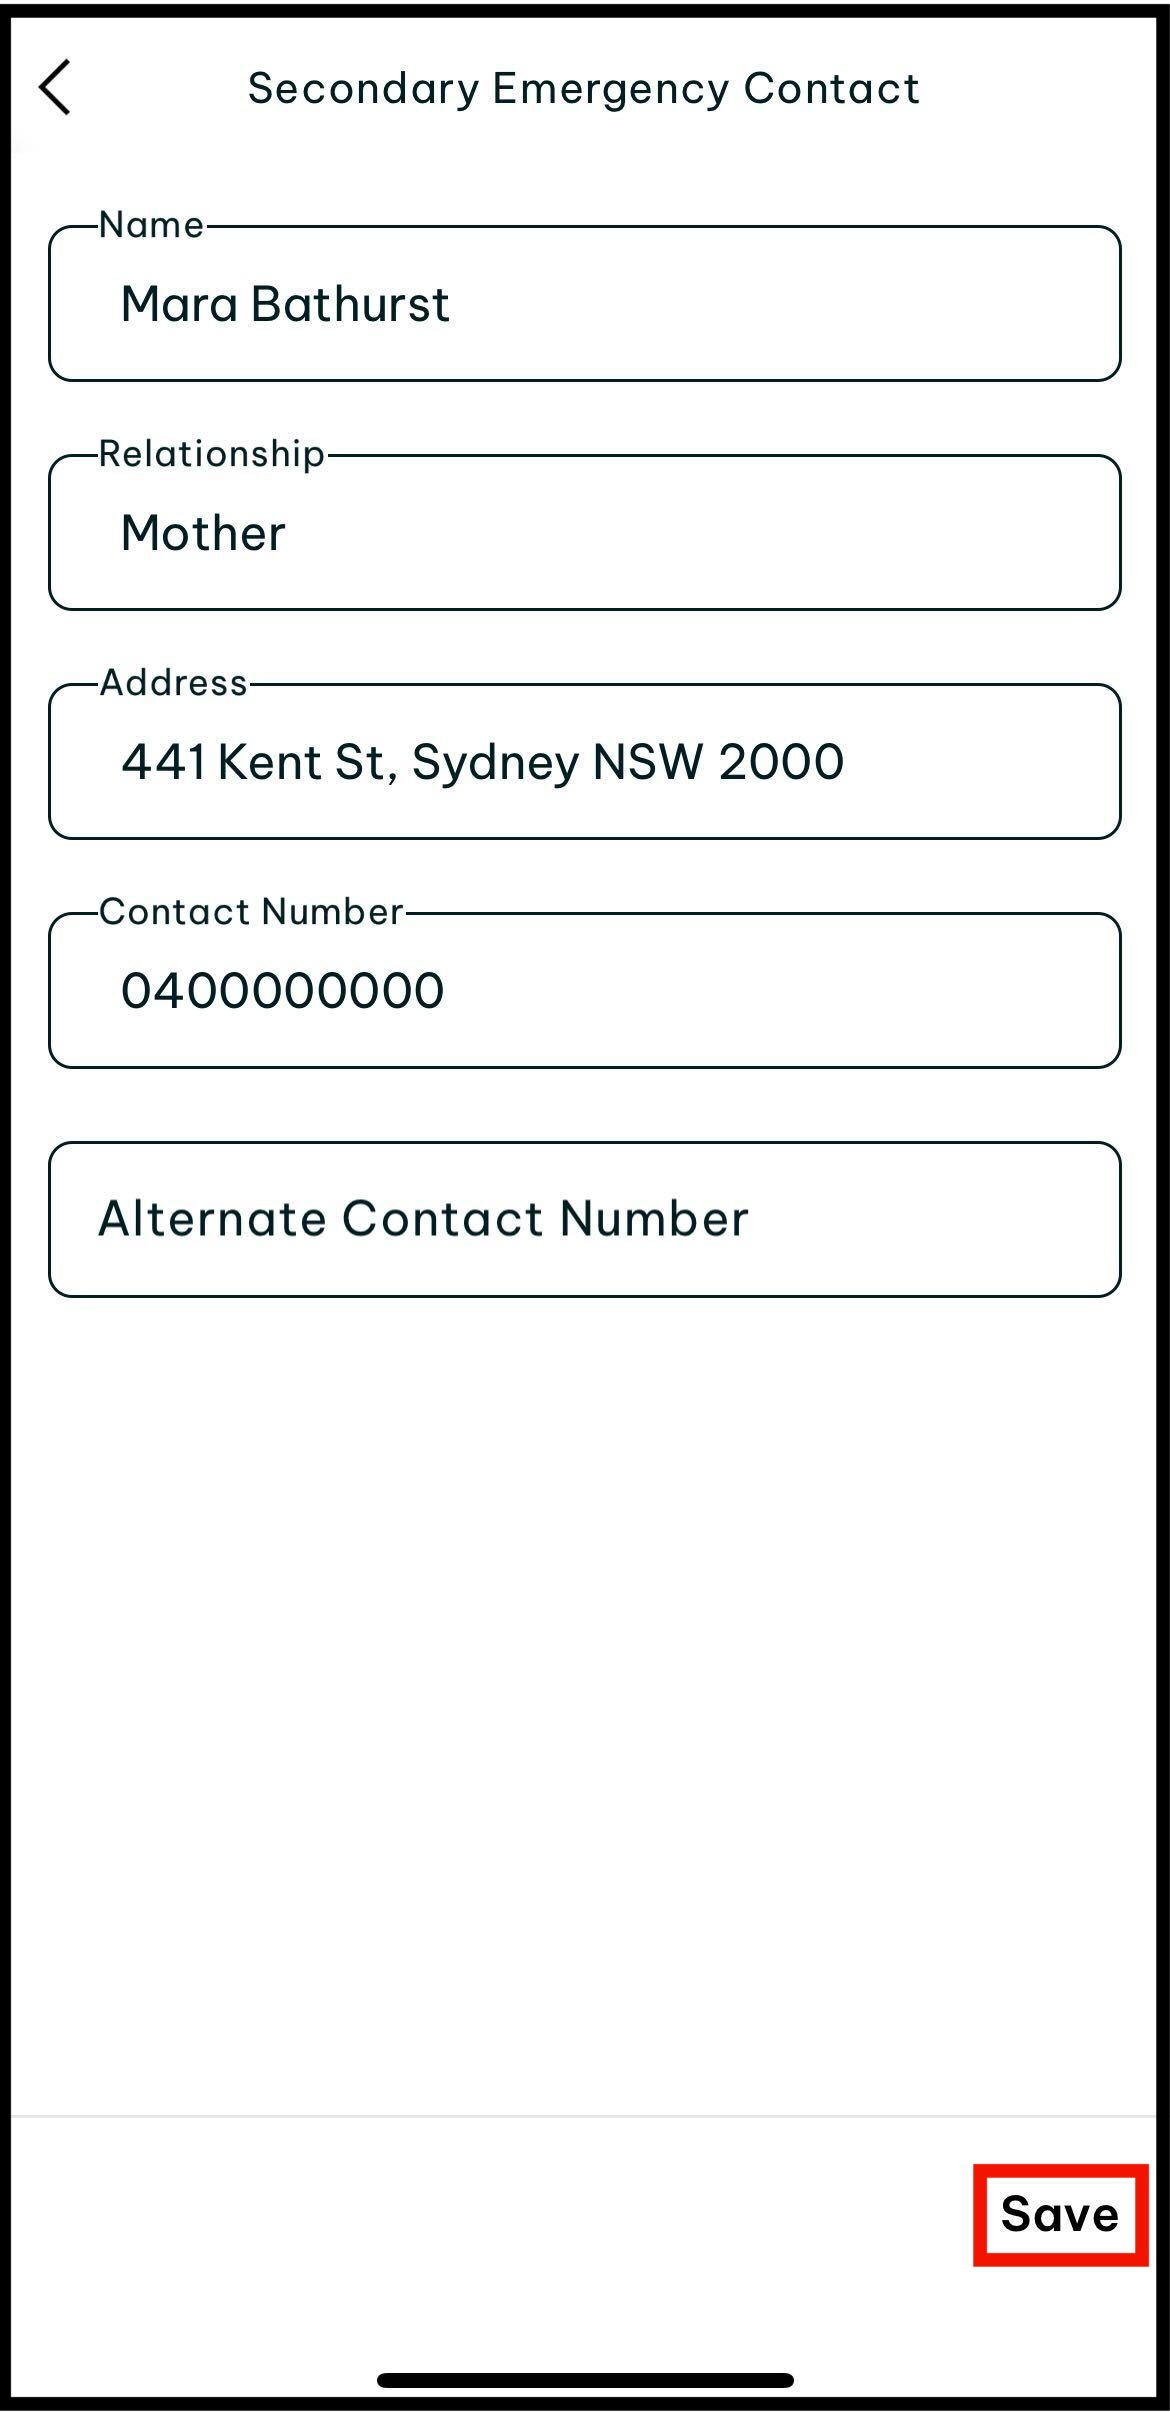 Screenshot of where to tap on save to save your emergency contact details